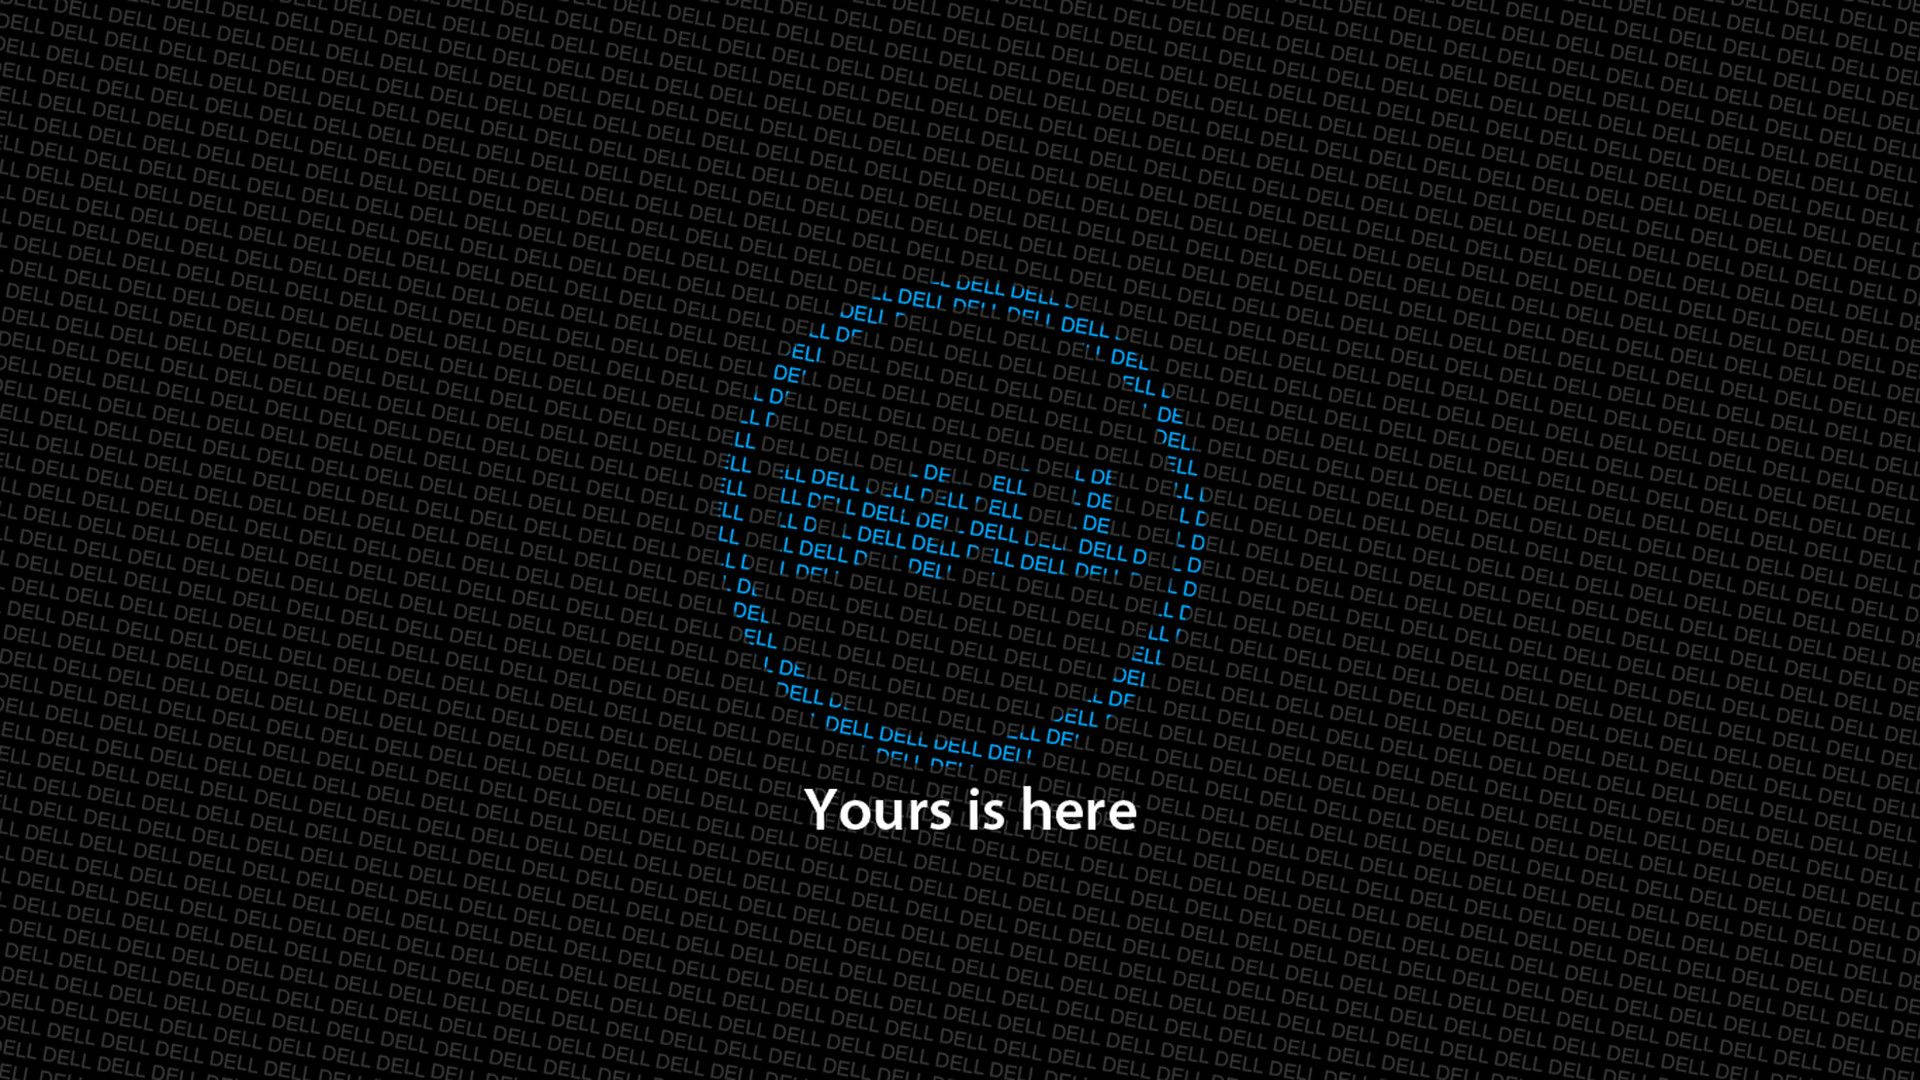 Dell Hd Logos In Black And Blue Background